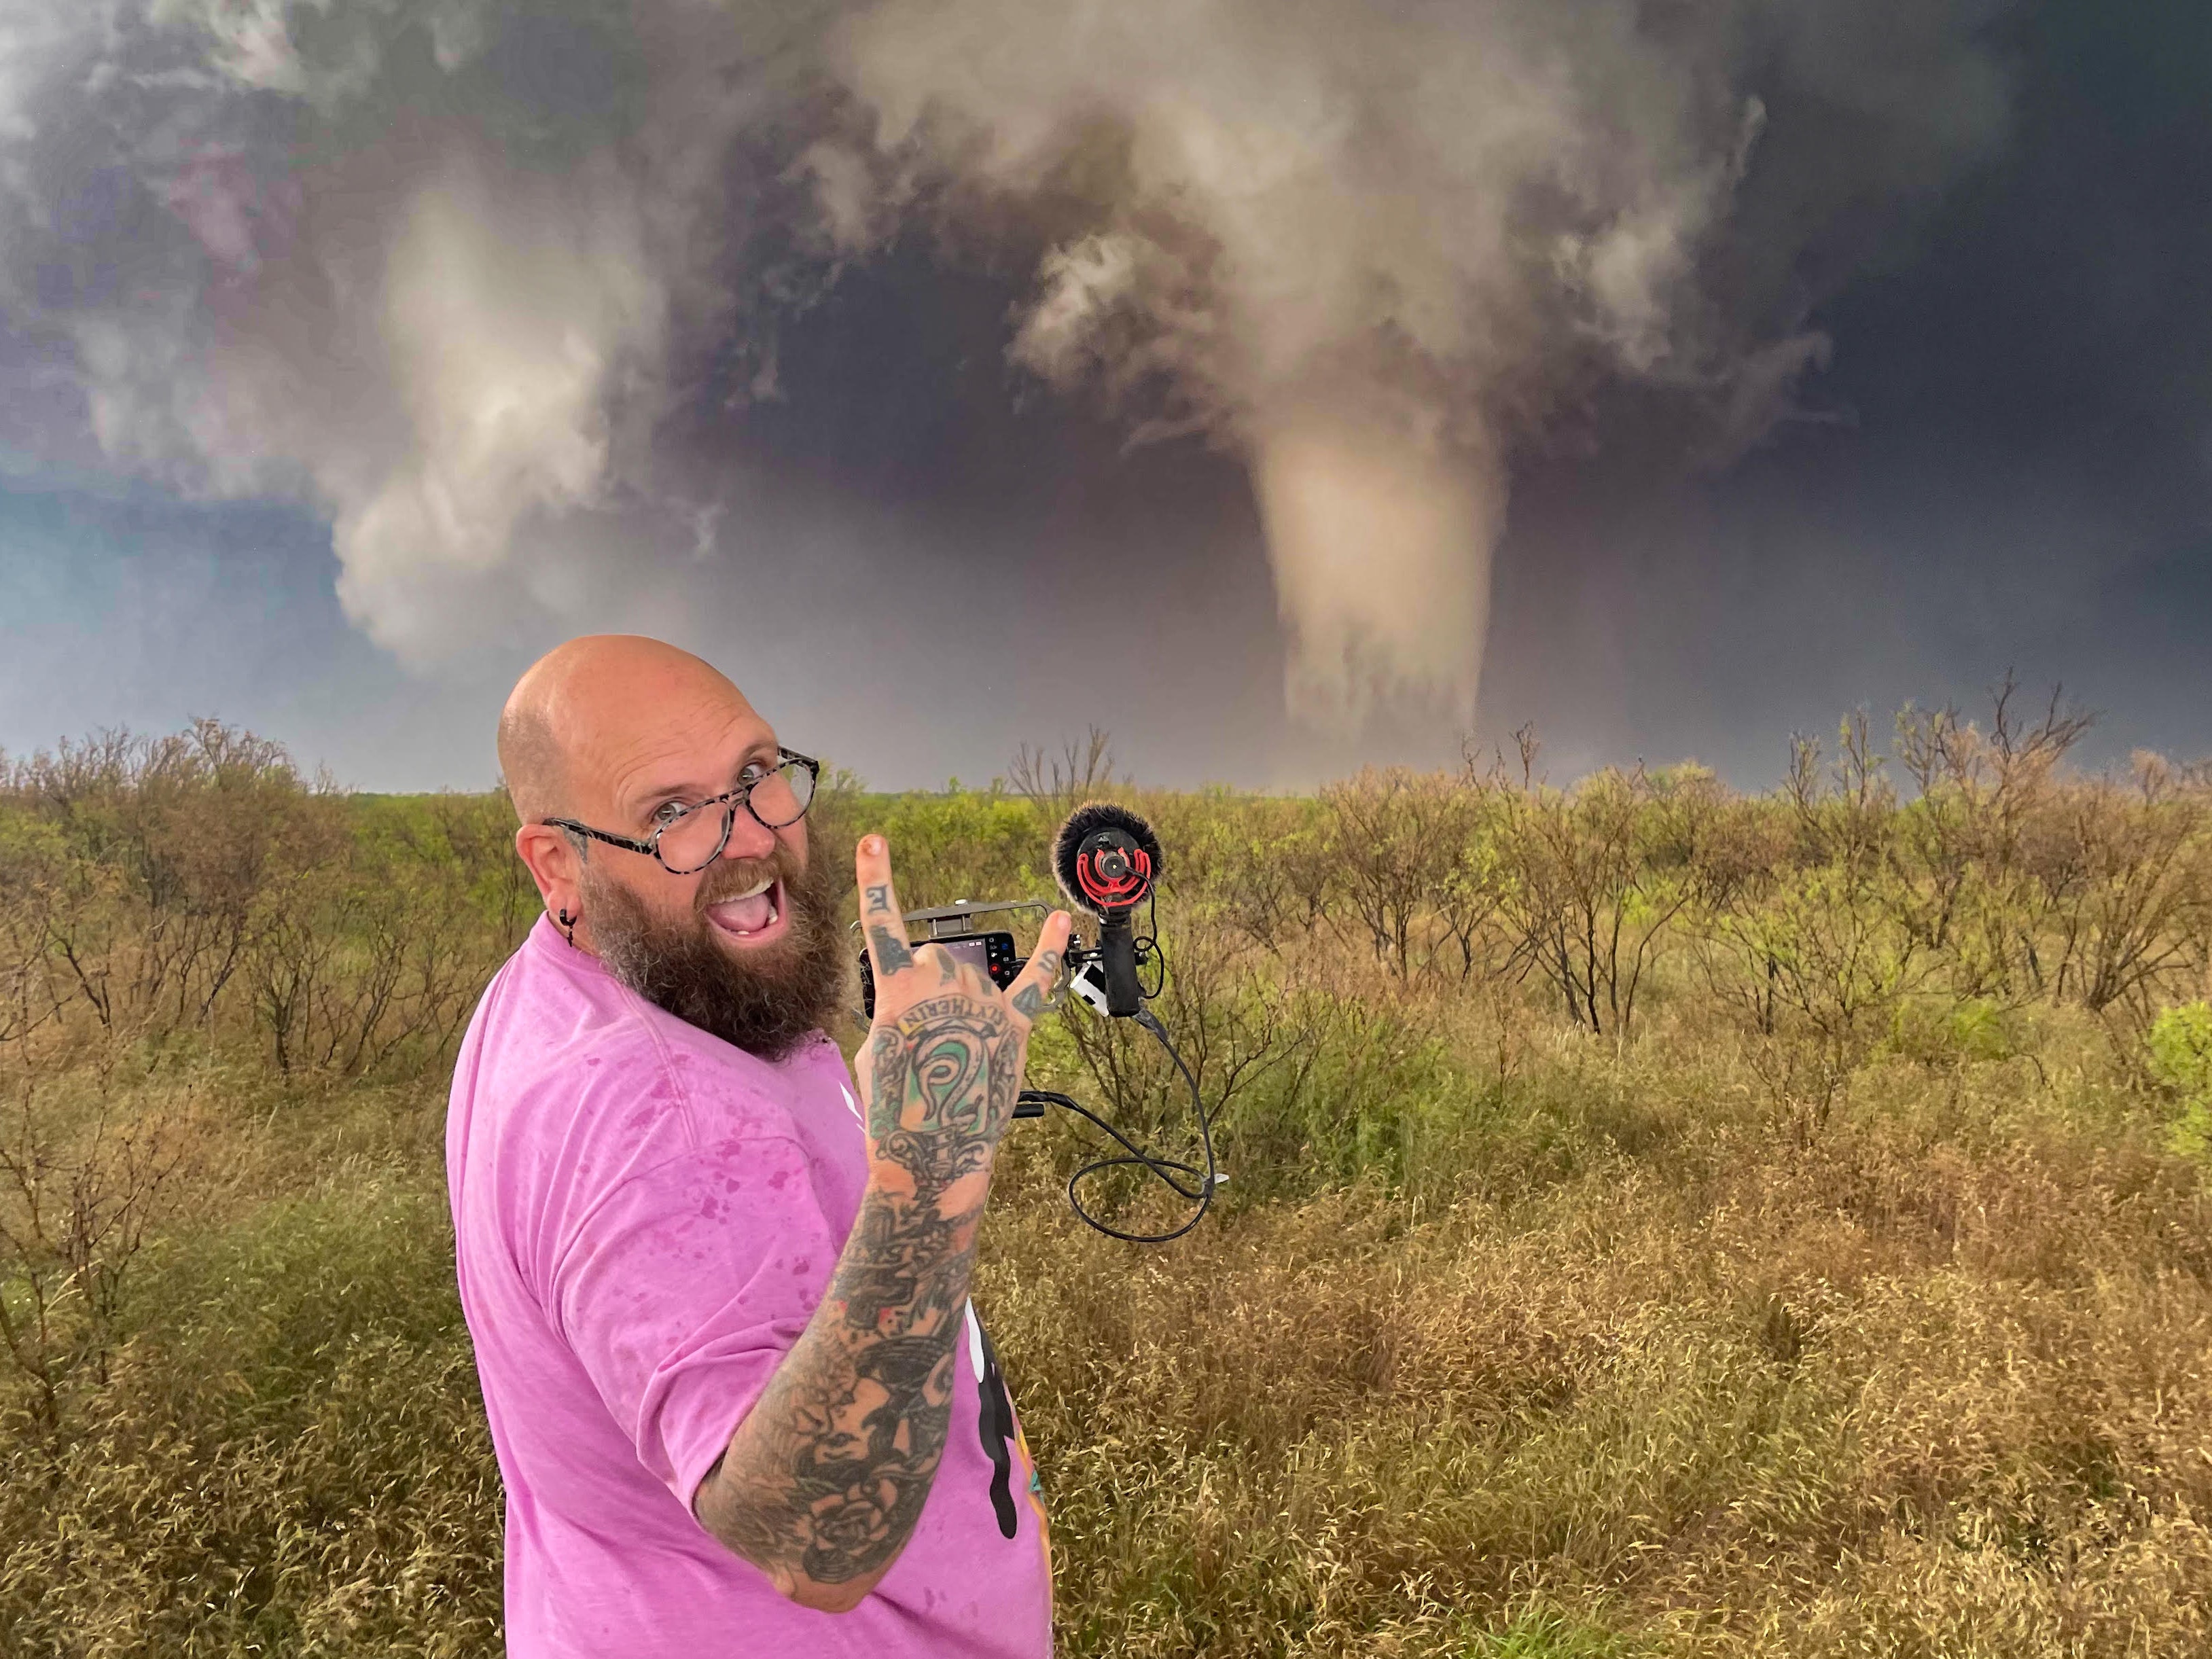 In Twisters, Storm-Chasers Defy Death For Online Fame. Here's What It Actually Takes